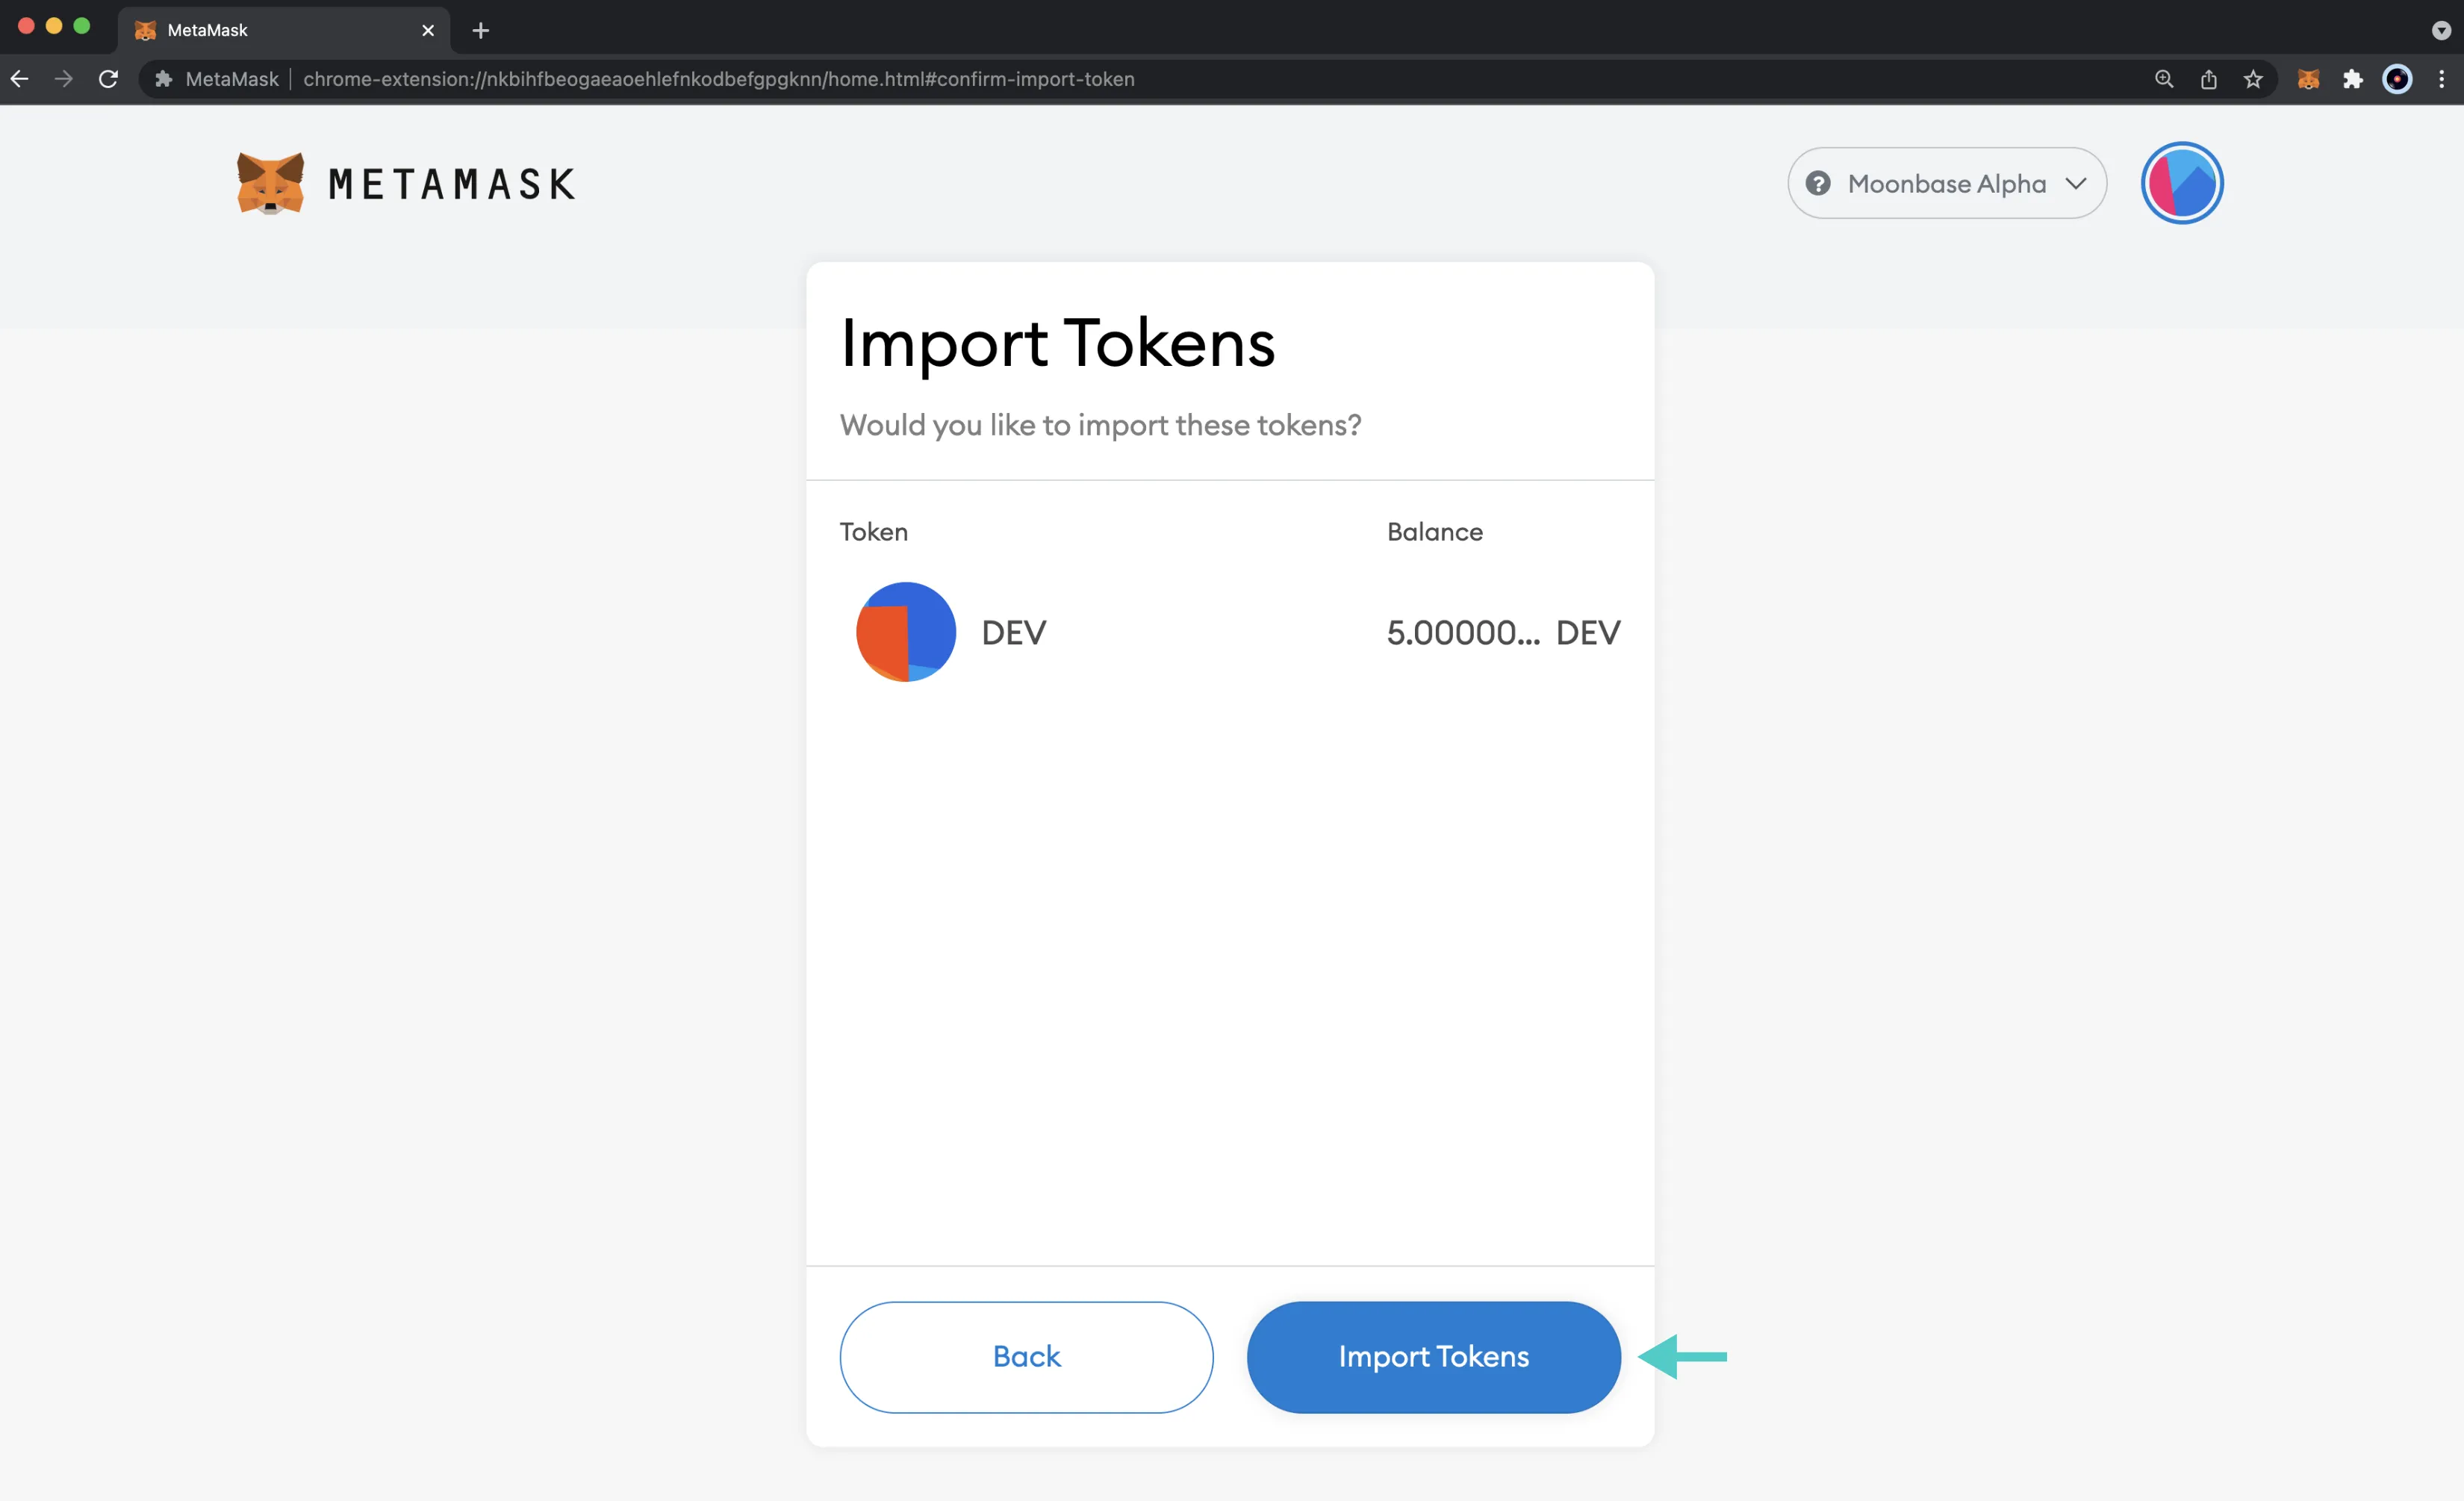 Confirm and Import Tokens